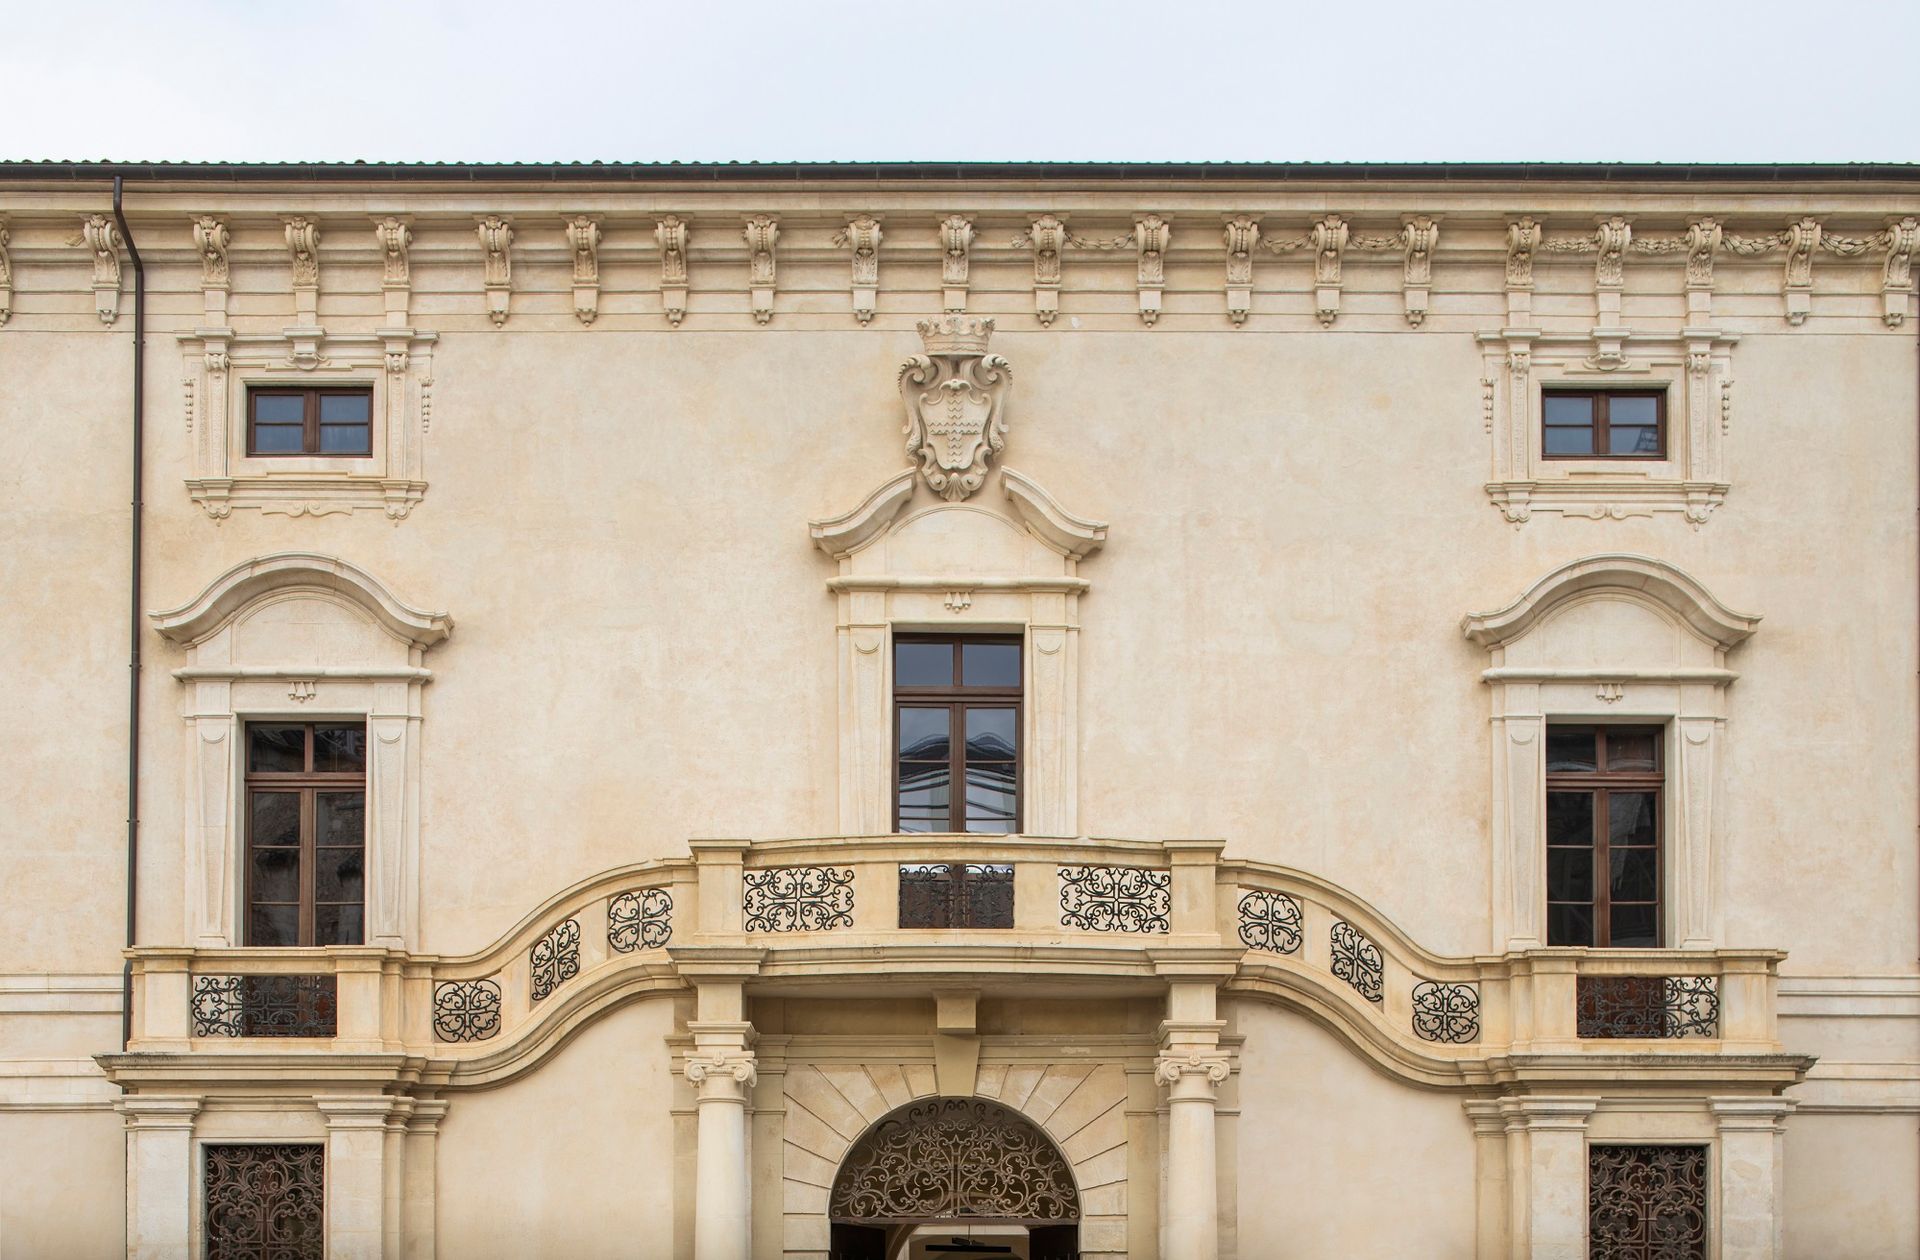 Palazzo Ardinghelli underwent a €7.2m restoration following a donation from the Russian government at the G8 summit in L'Aquila after the 2009 earthquake Photo: Andrea Jemolo; courtesy of Fondazione MAXXI